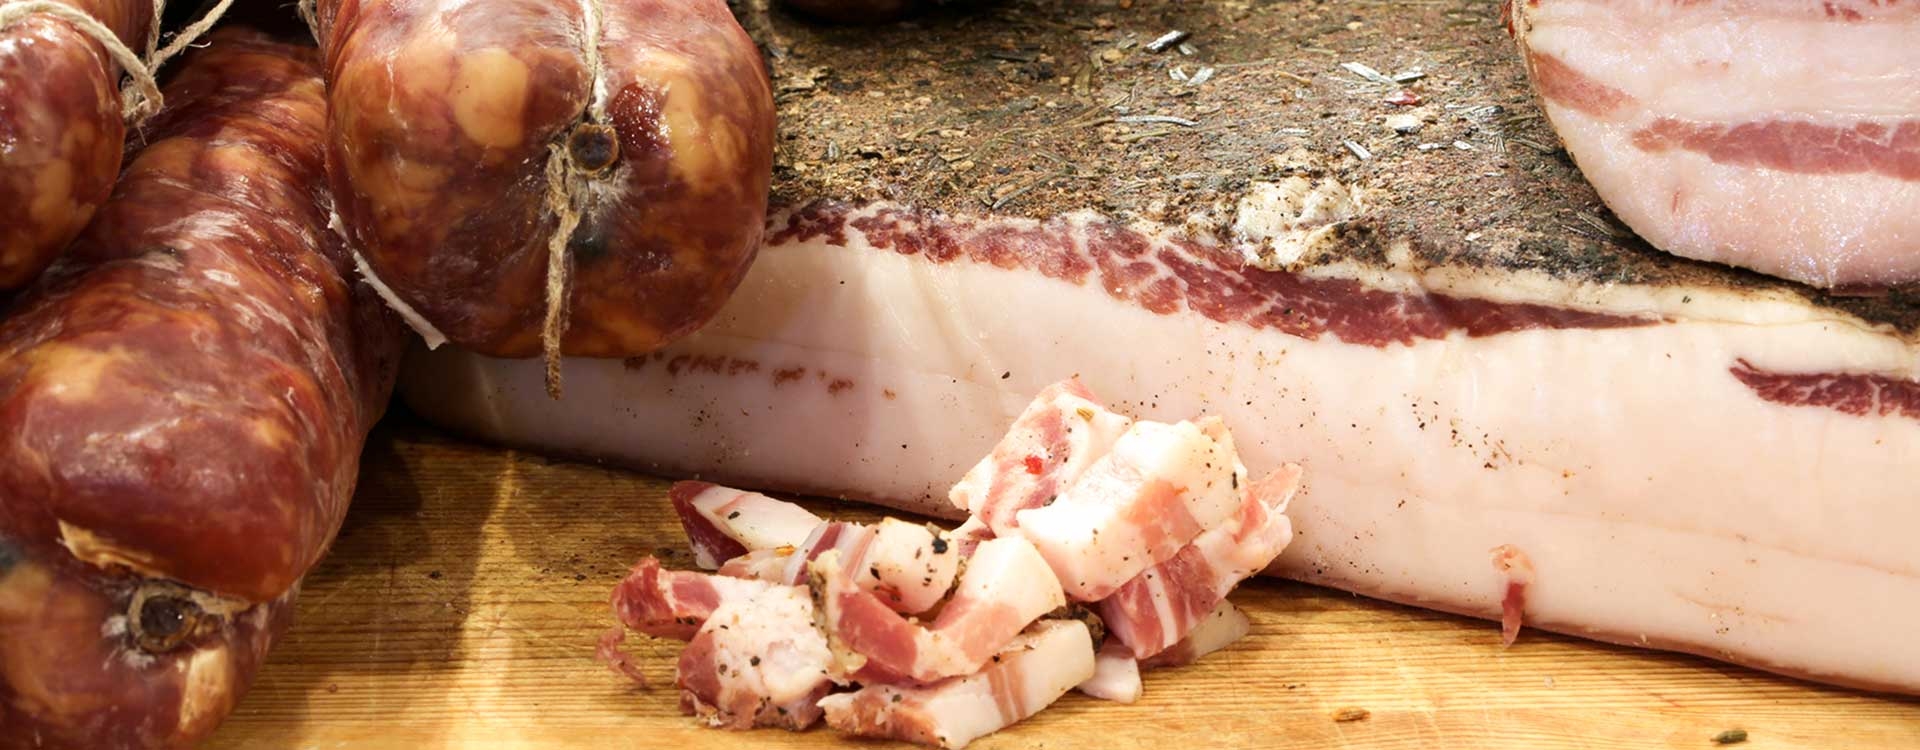 Tuscan butchers: traditional cold cuts